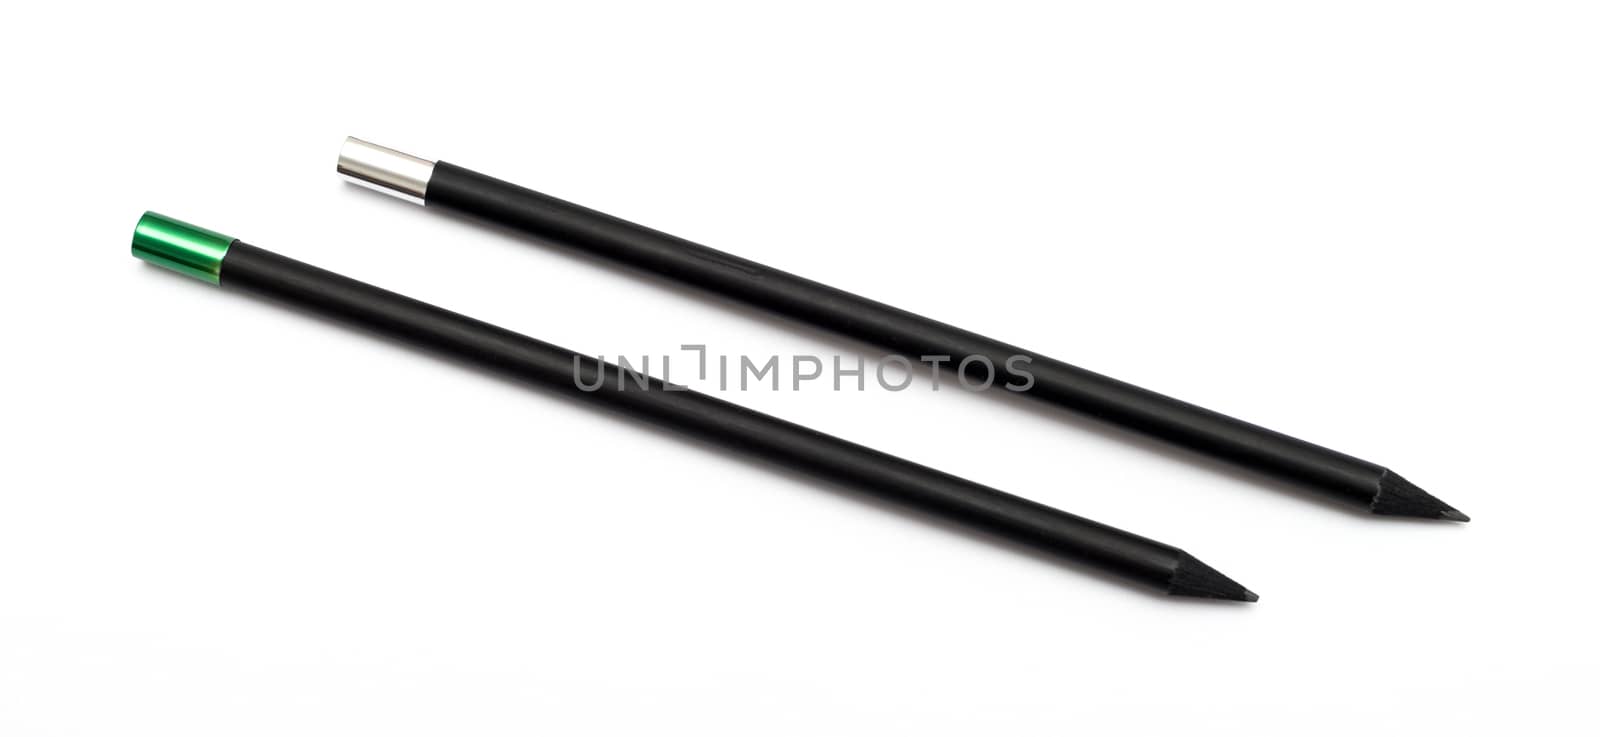 Black pencils isolated on a white background